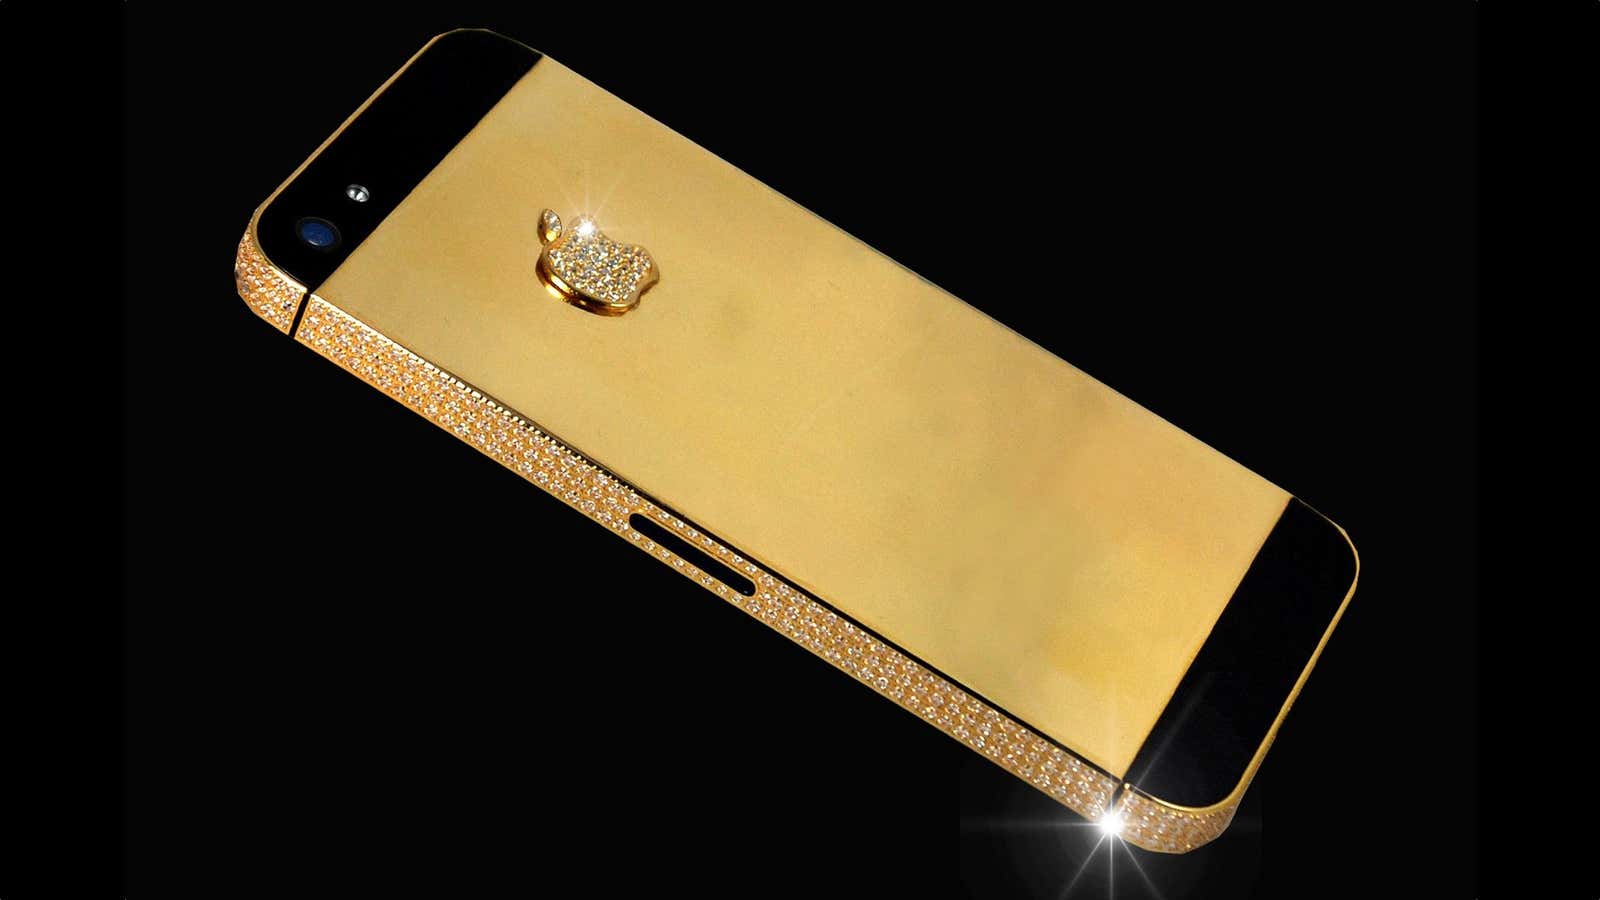 An anonymous Chinese businessman paid 10 million GBP for this gold iPhone. Will his fellow citizens opt for a less pricey model direct from Apple?